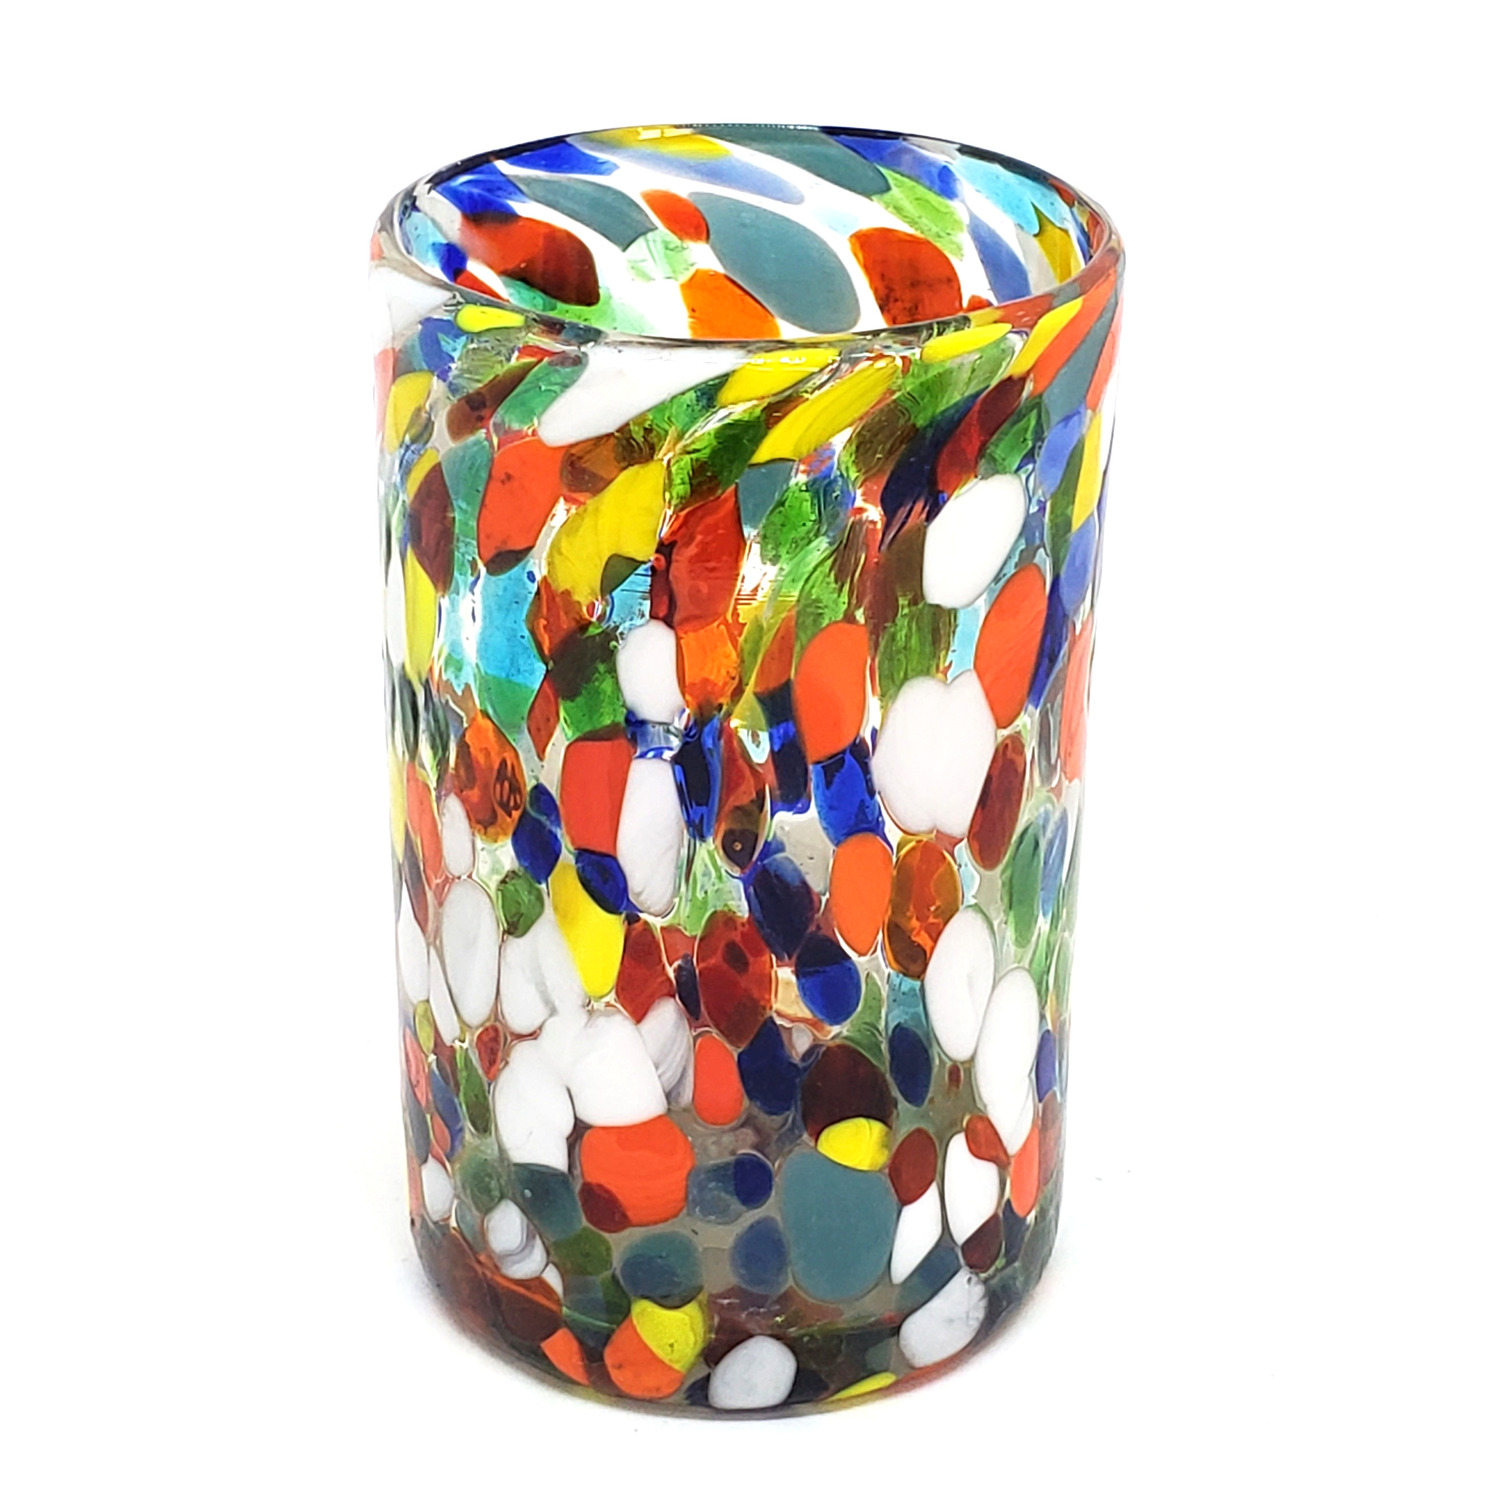 New Items / Confetti Carnival 14 oz Drinking Glasses  / Let the spring come into your home with this colorful set of glasses. The multicolor glass decoration makes them a standout in any place.